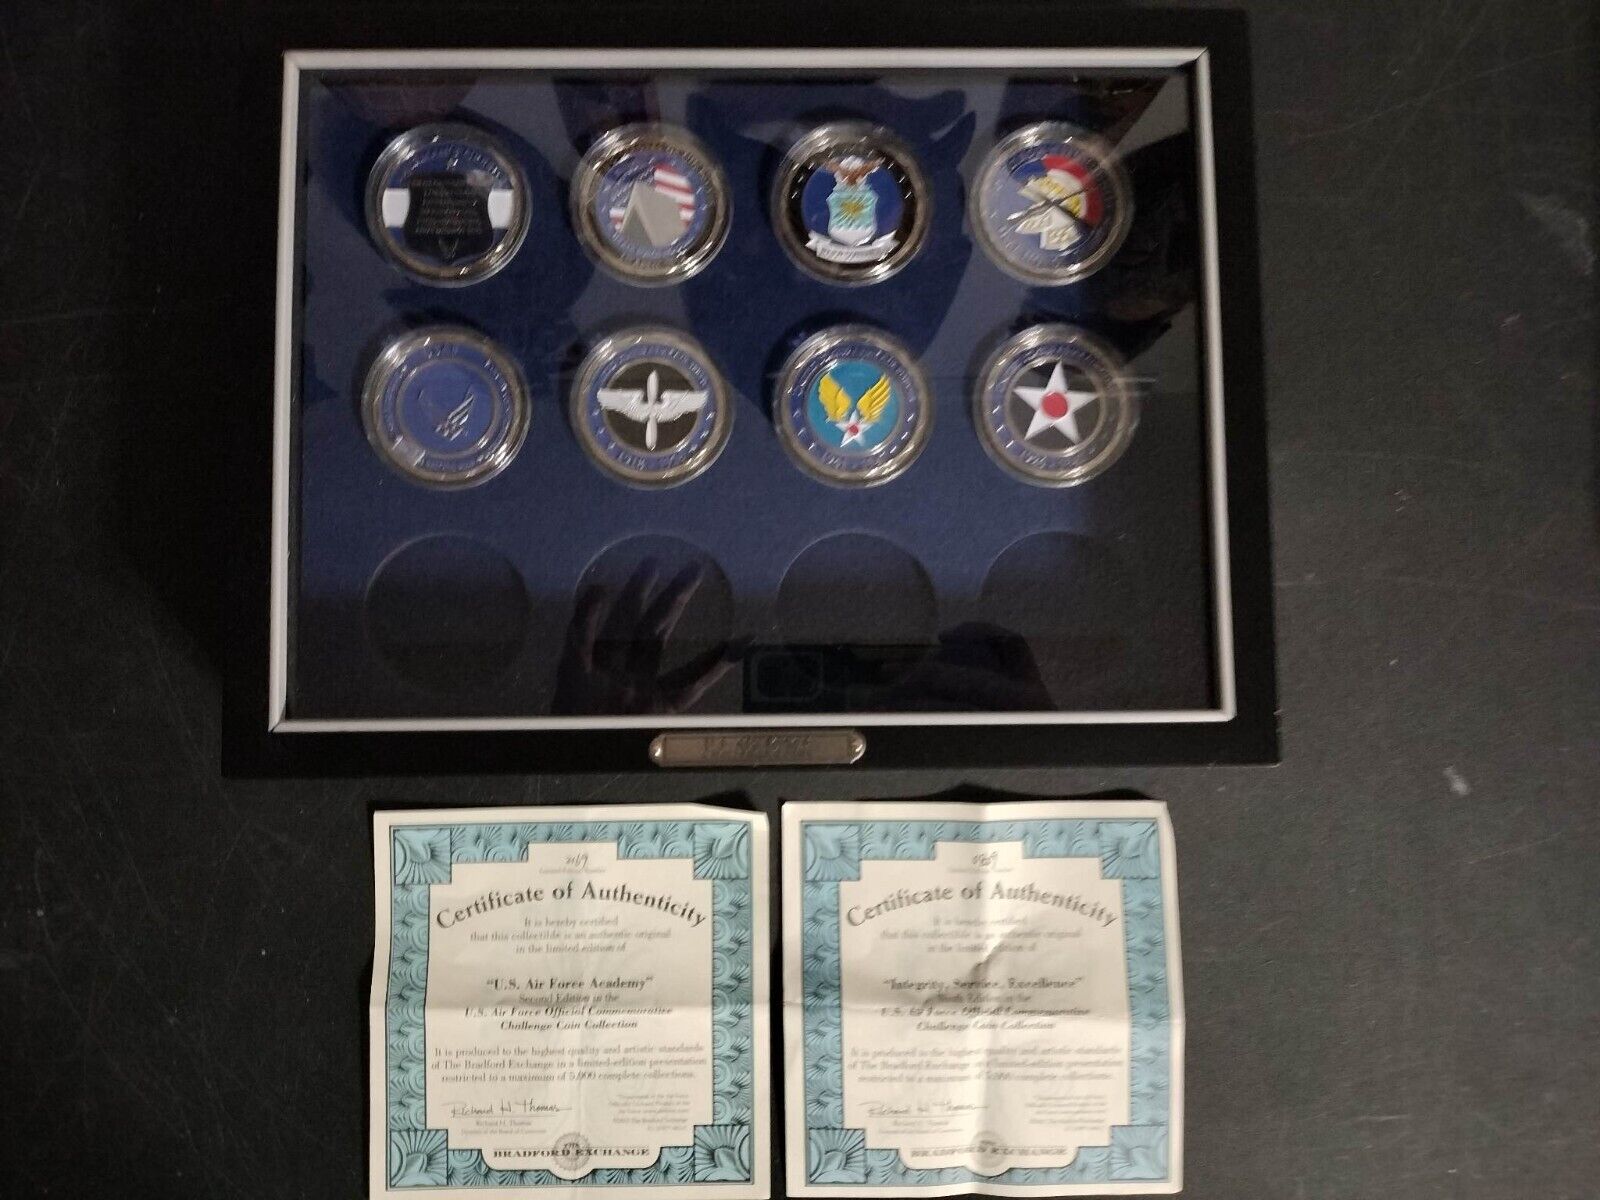  US AIR FORCE Official Commemorative Challenge Coin Collection Bradford Exchange